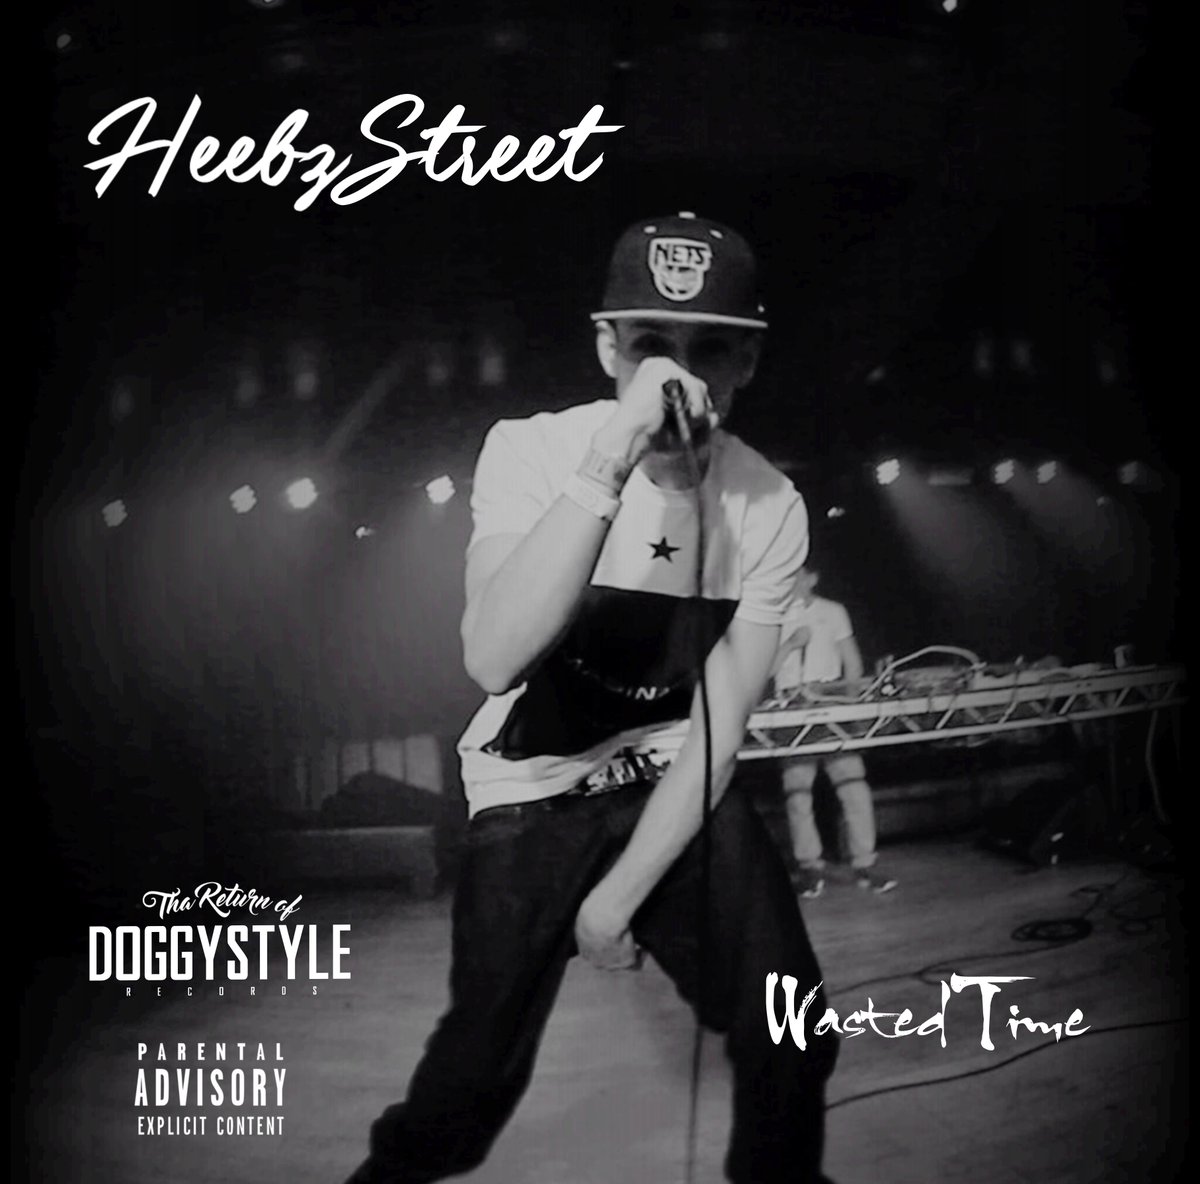 bacc with anotha one !! #DoggystyleRecords @HeebzStreet 